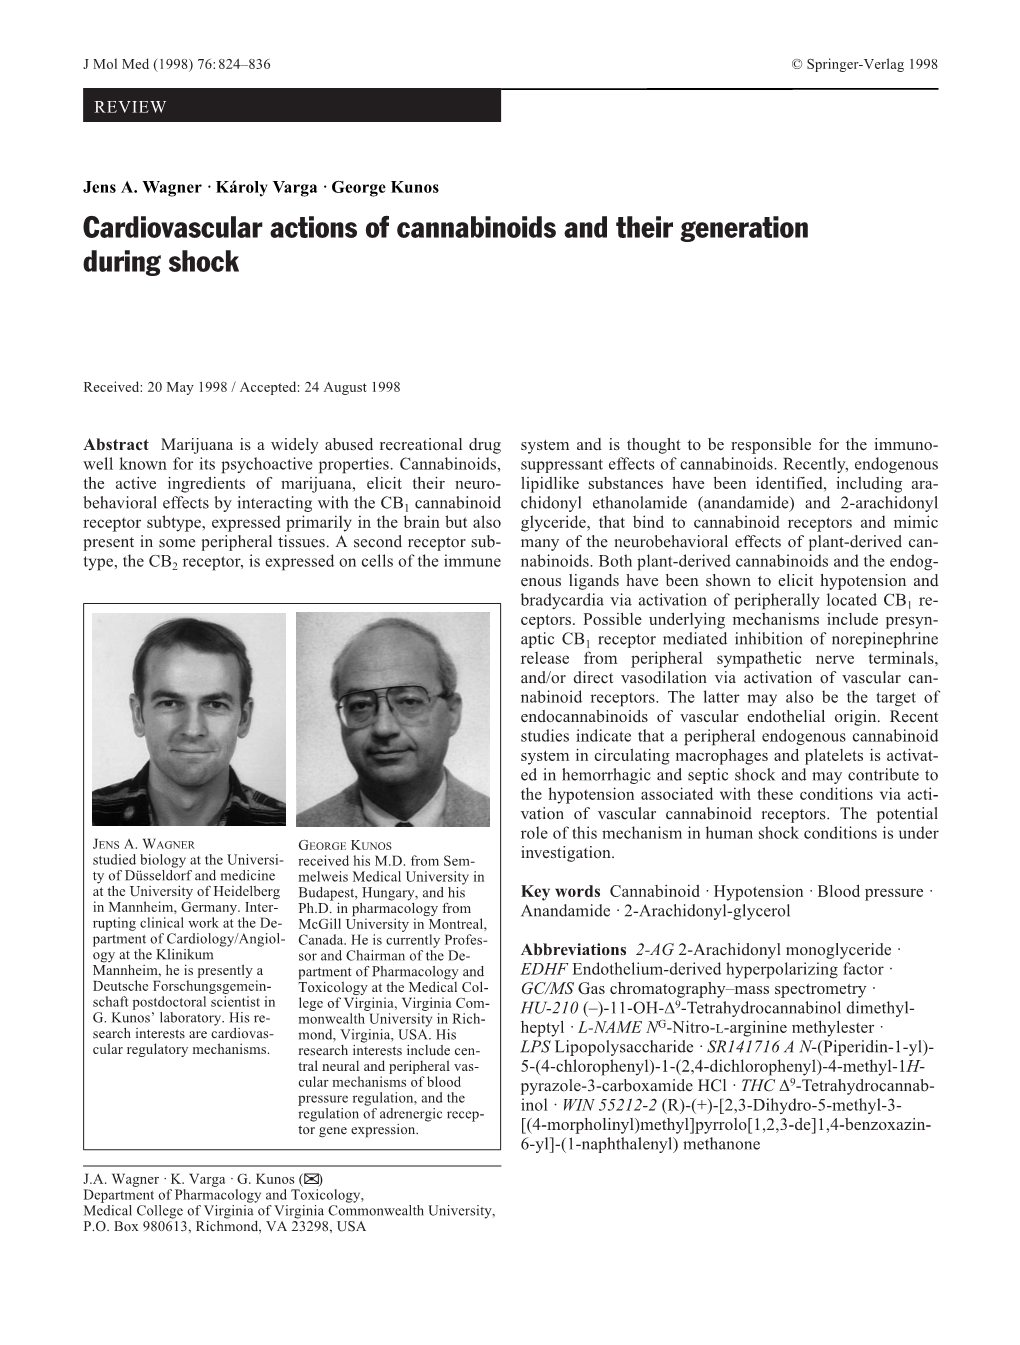 Cardiovascular Actions of Cannabinoids and Their Generation During Shock